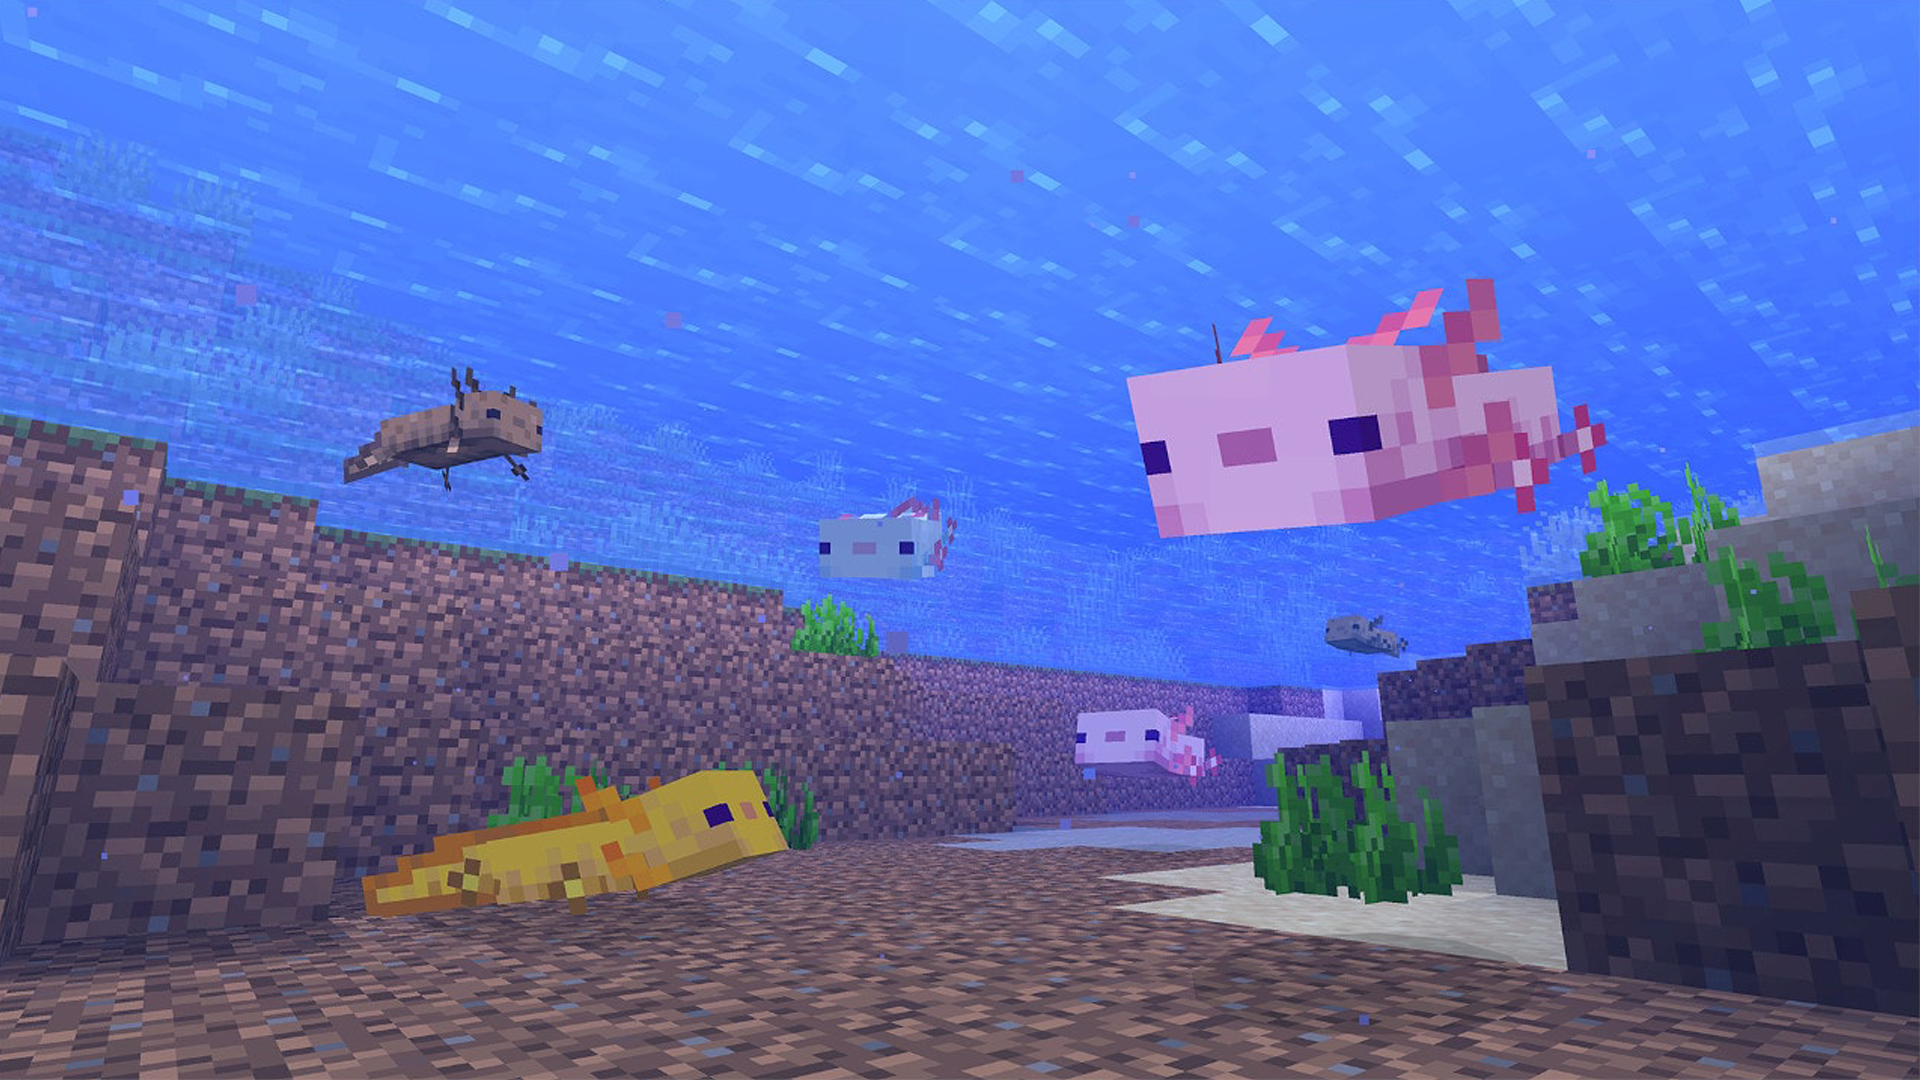 Minecraft 1.17 axolotl - how to find, tame, or breed the new mob |  GamesRadar+